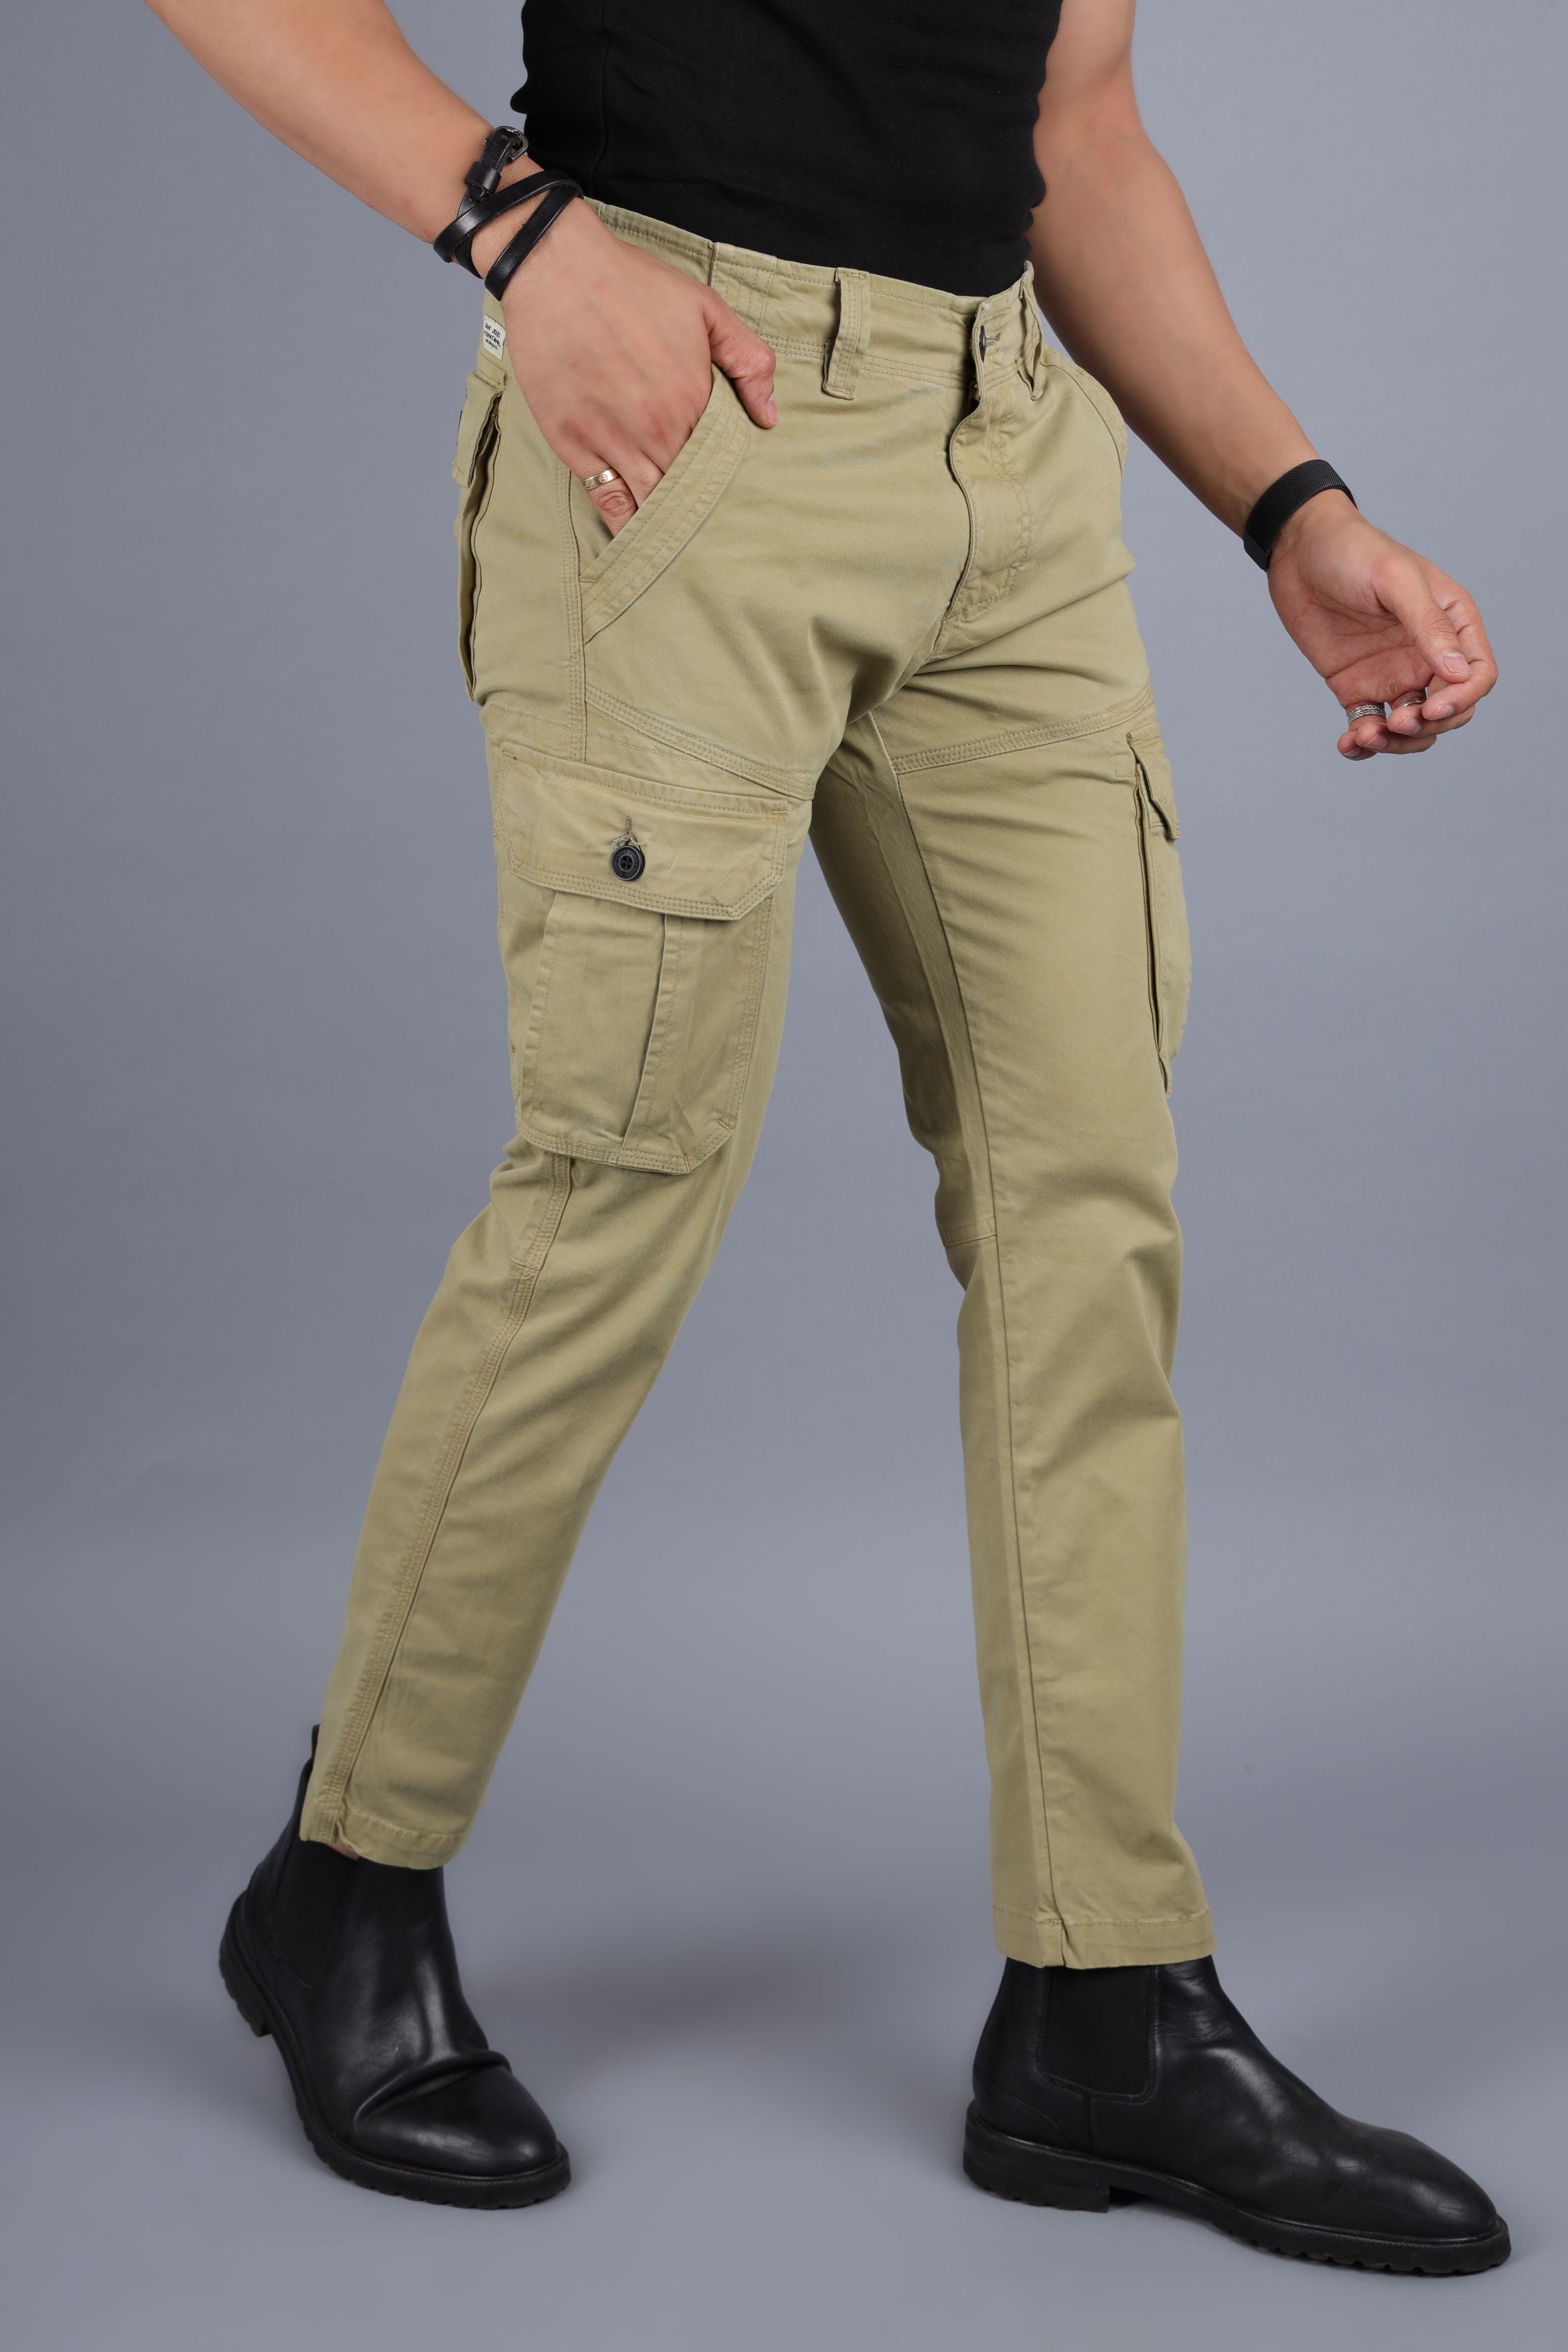 Men's DuluthFlex Dry on the Fly Slim Fit Cargo Pants | Duluth Trading  Company